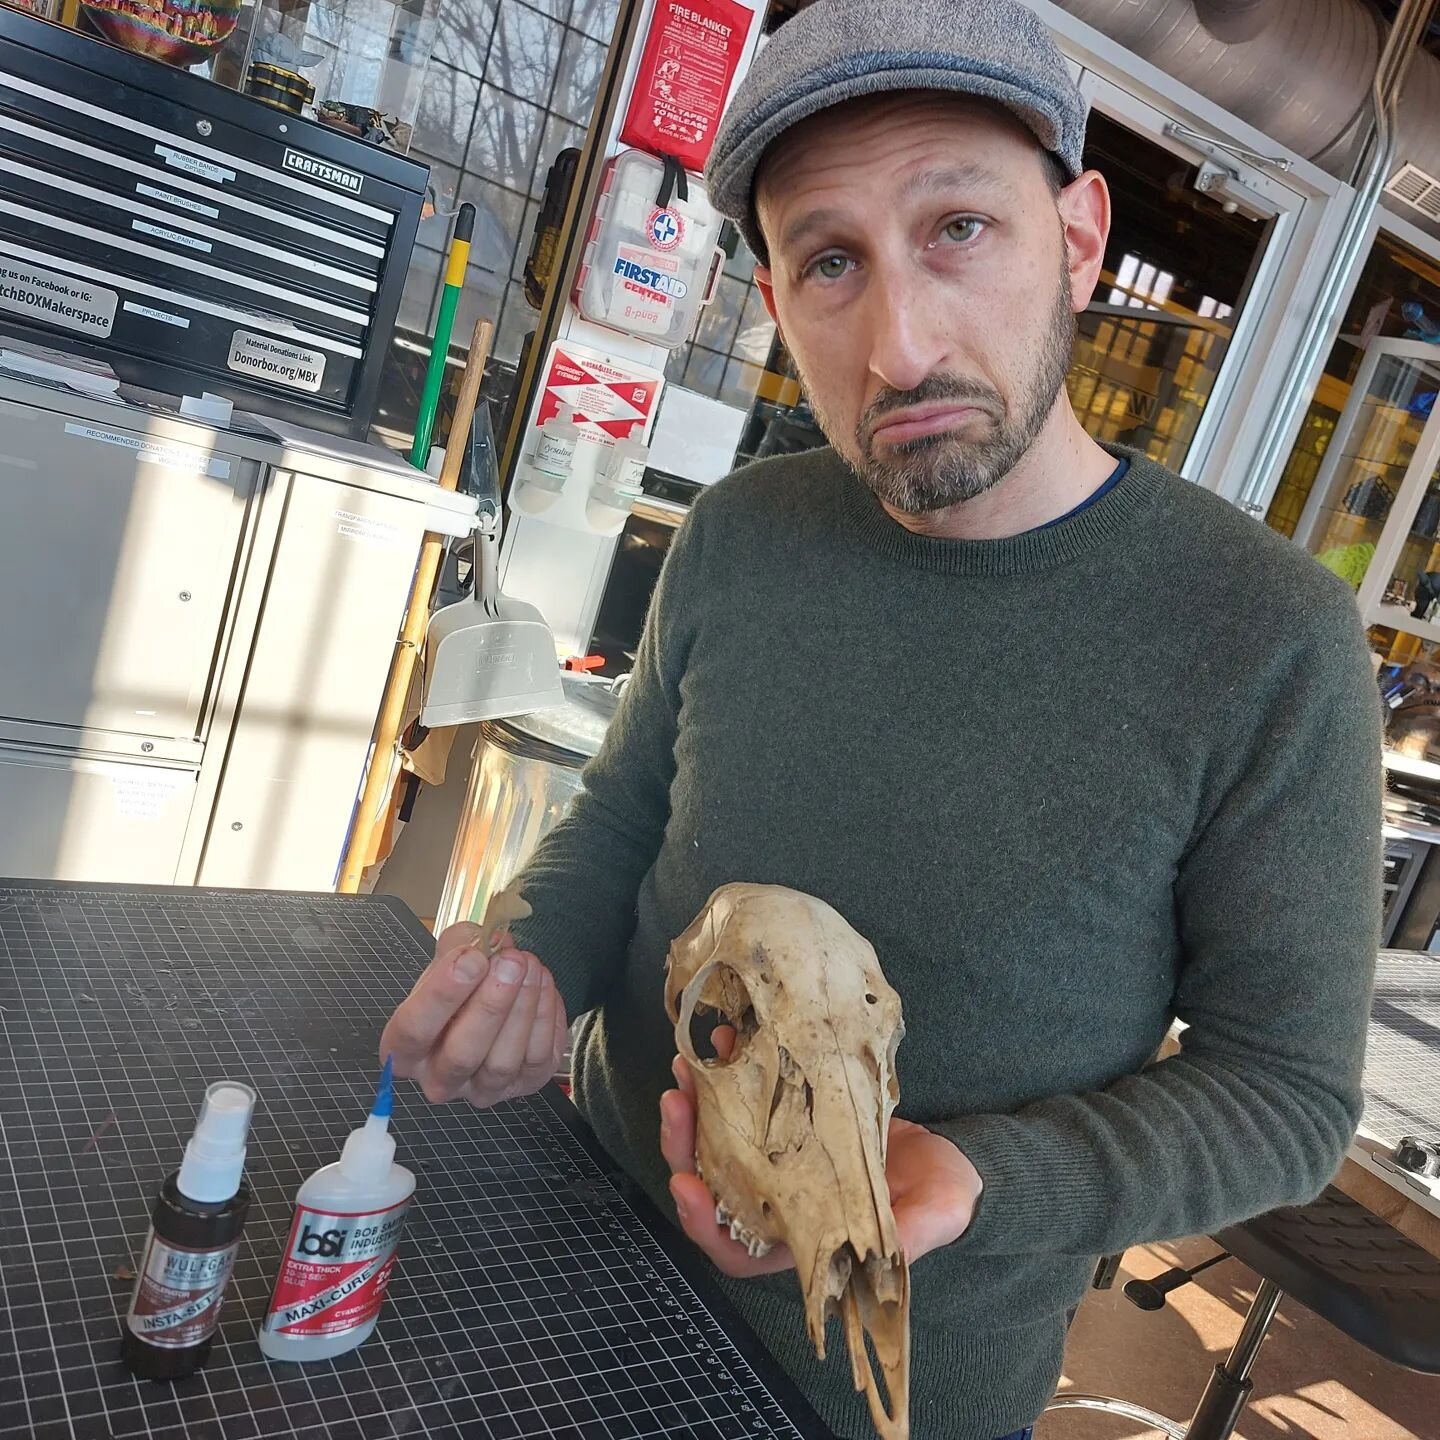 Robert got his skull fixed today in the space.  This is one of his kid's prize possessions and he broke it by mistake - no matter - we got him covered with some BSI maxi-cure CA glue. 

#bsi #bobsmithindustries #repair #MatchBOXmakerspace #makerspace